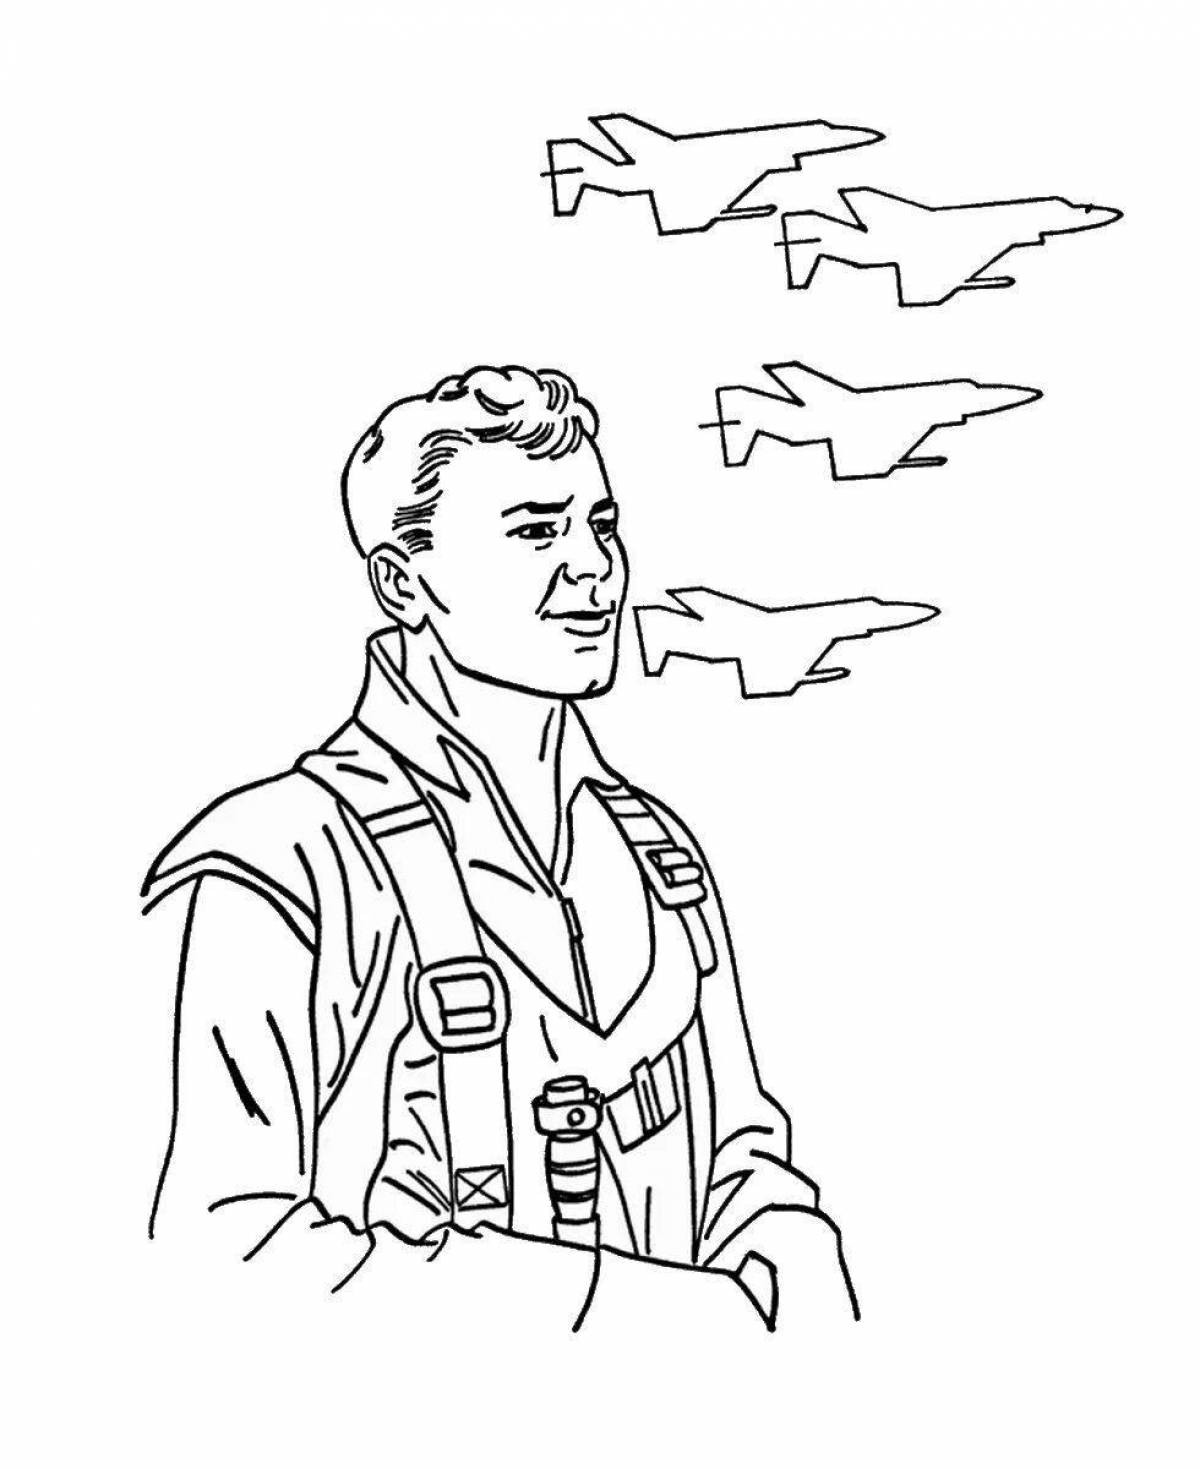 Coloring page happy soldier and child